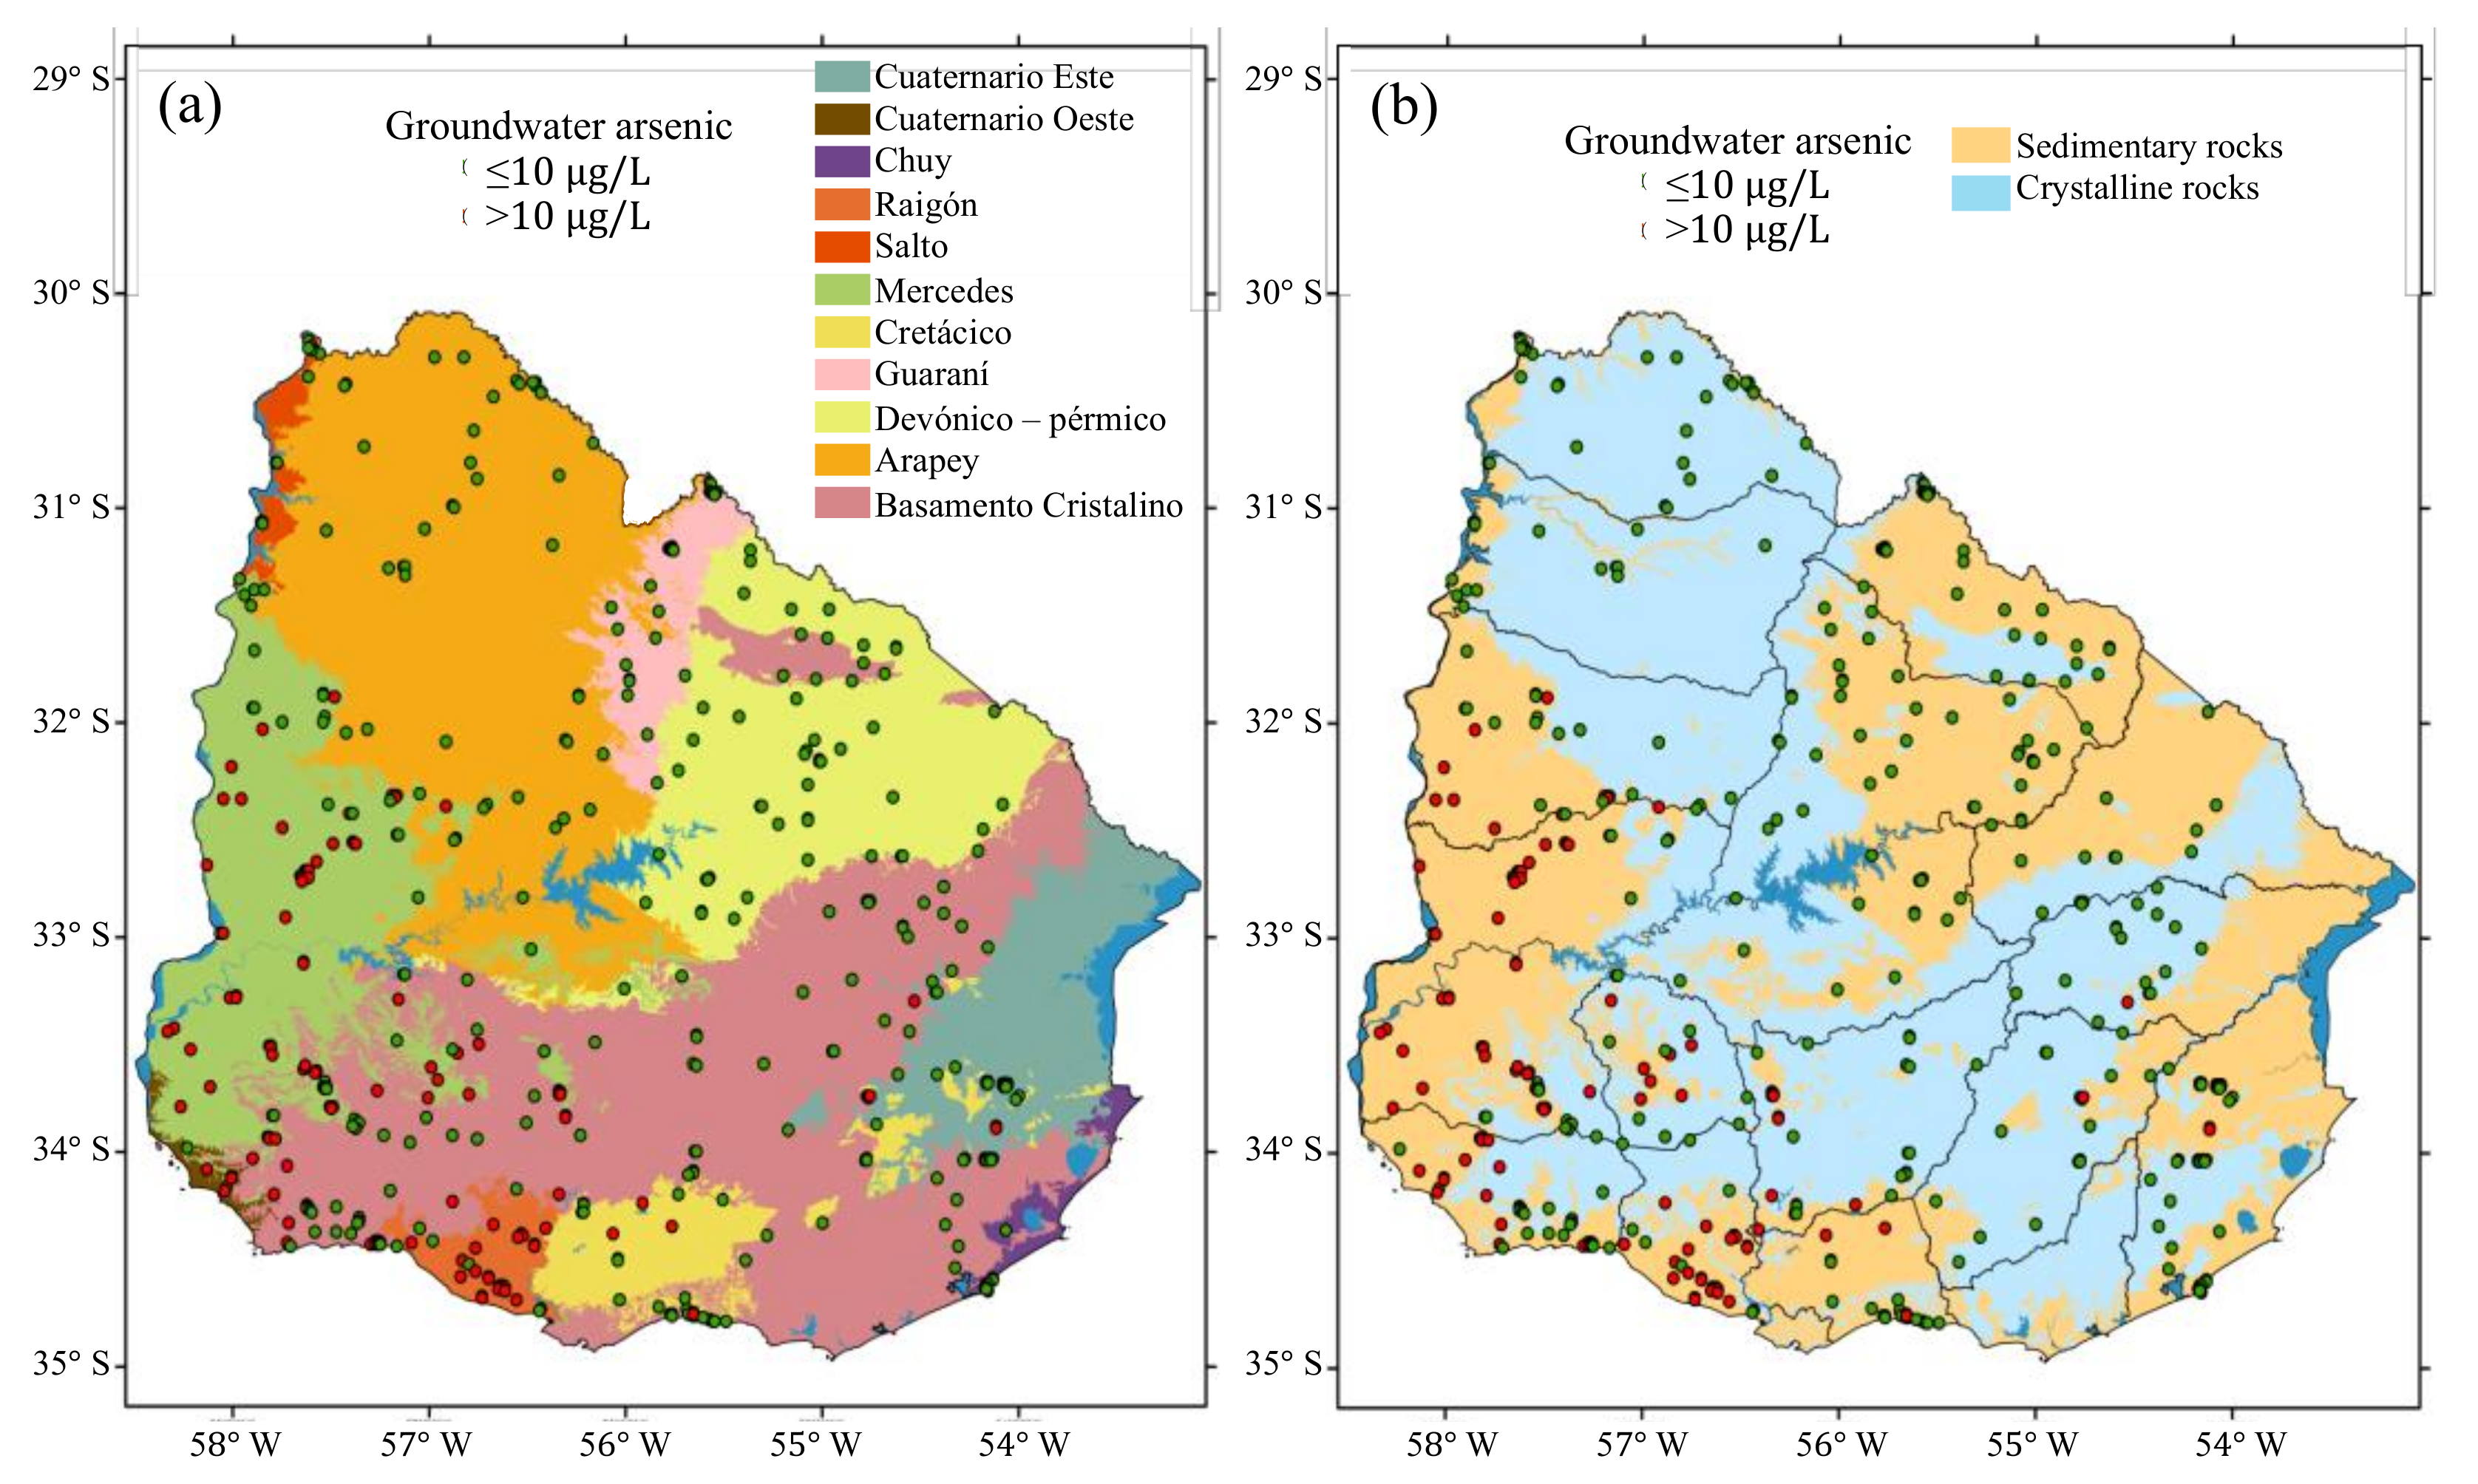 Arsenic in the groundwater of Vojvodina – GeoERA